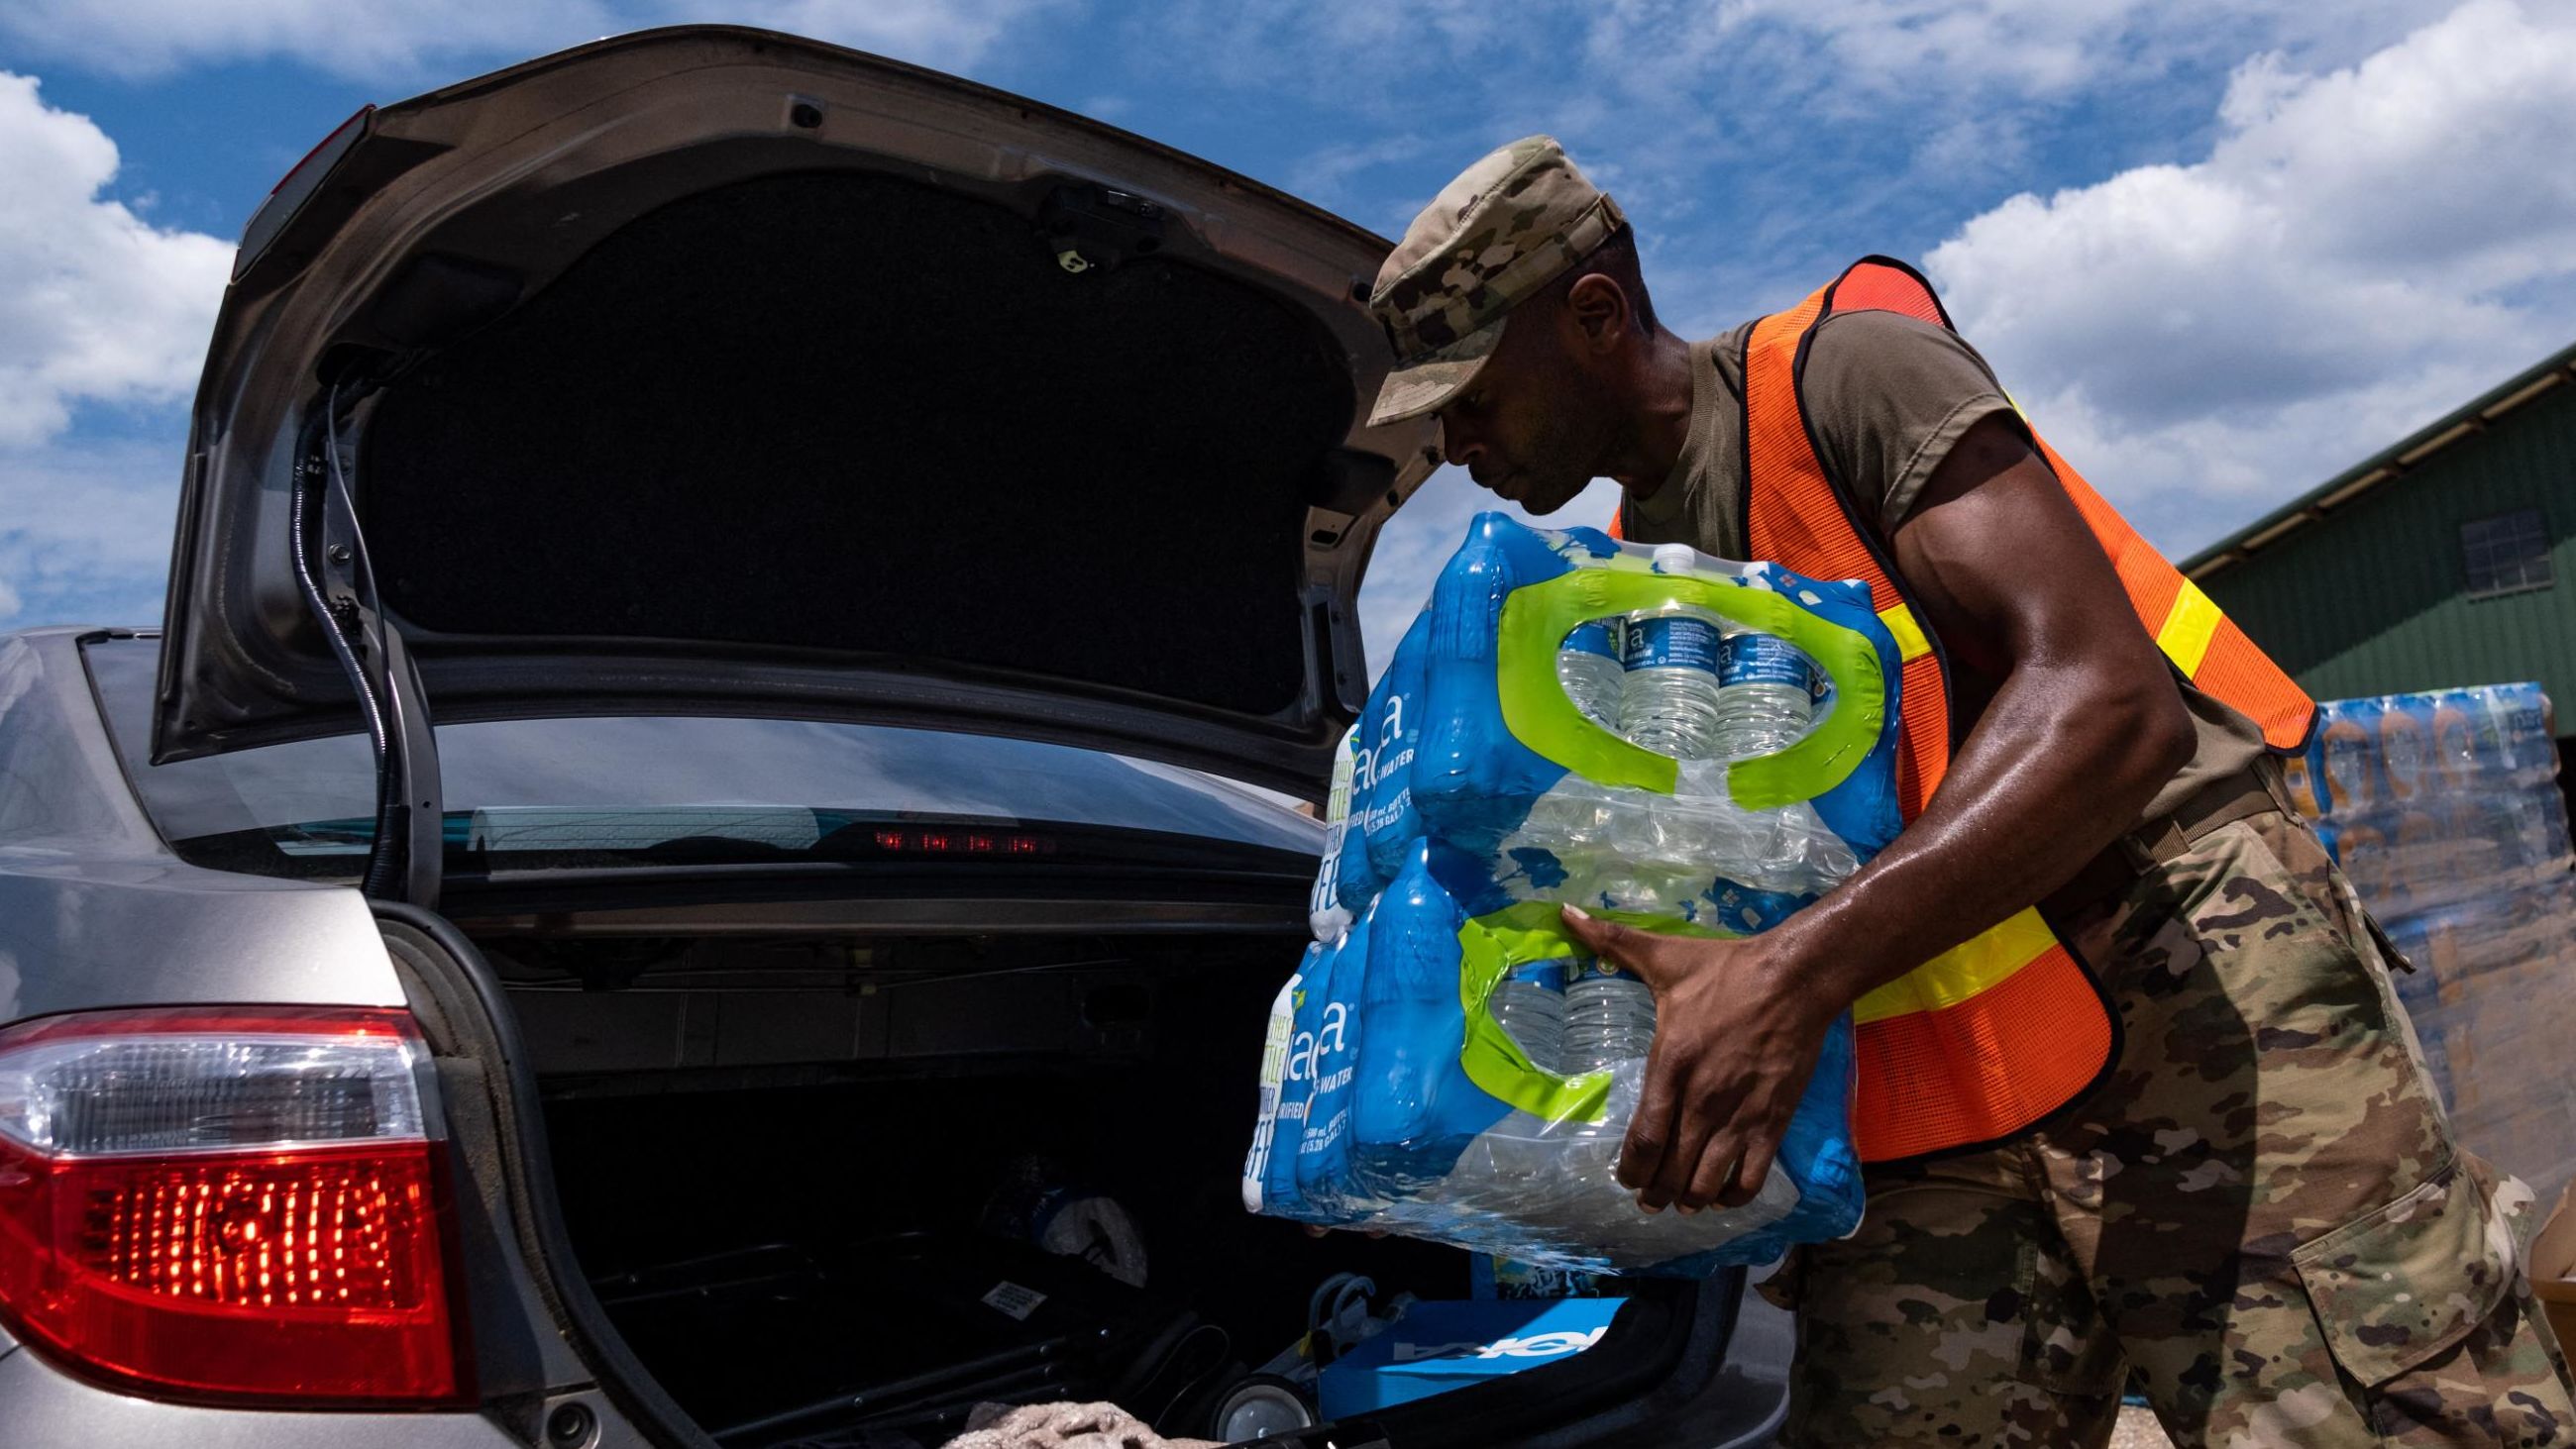 A member of the National Guard places a case of water in the back of a car at the State Fair Grounds in Jackson, Mississippi, on Friday.